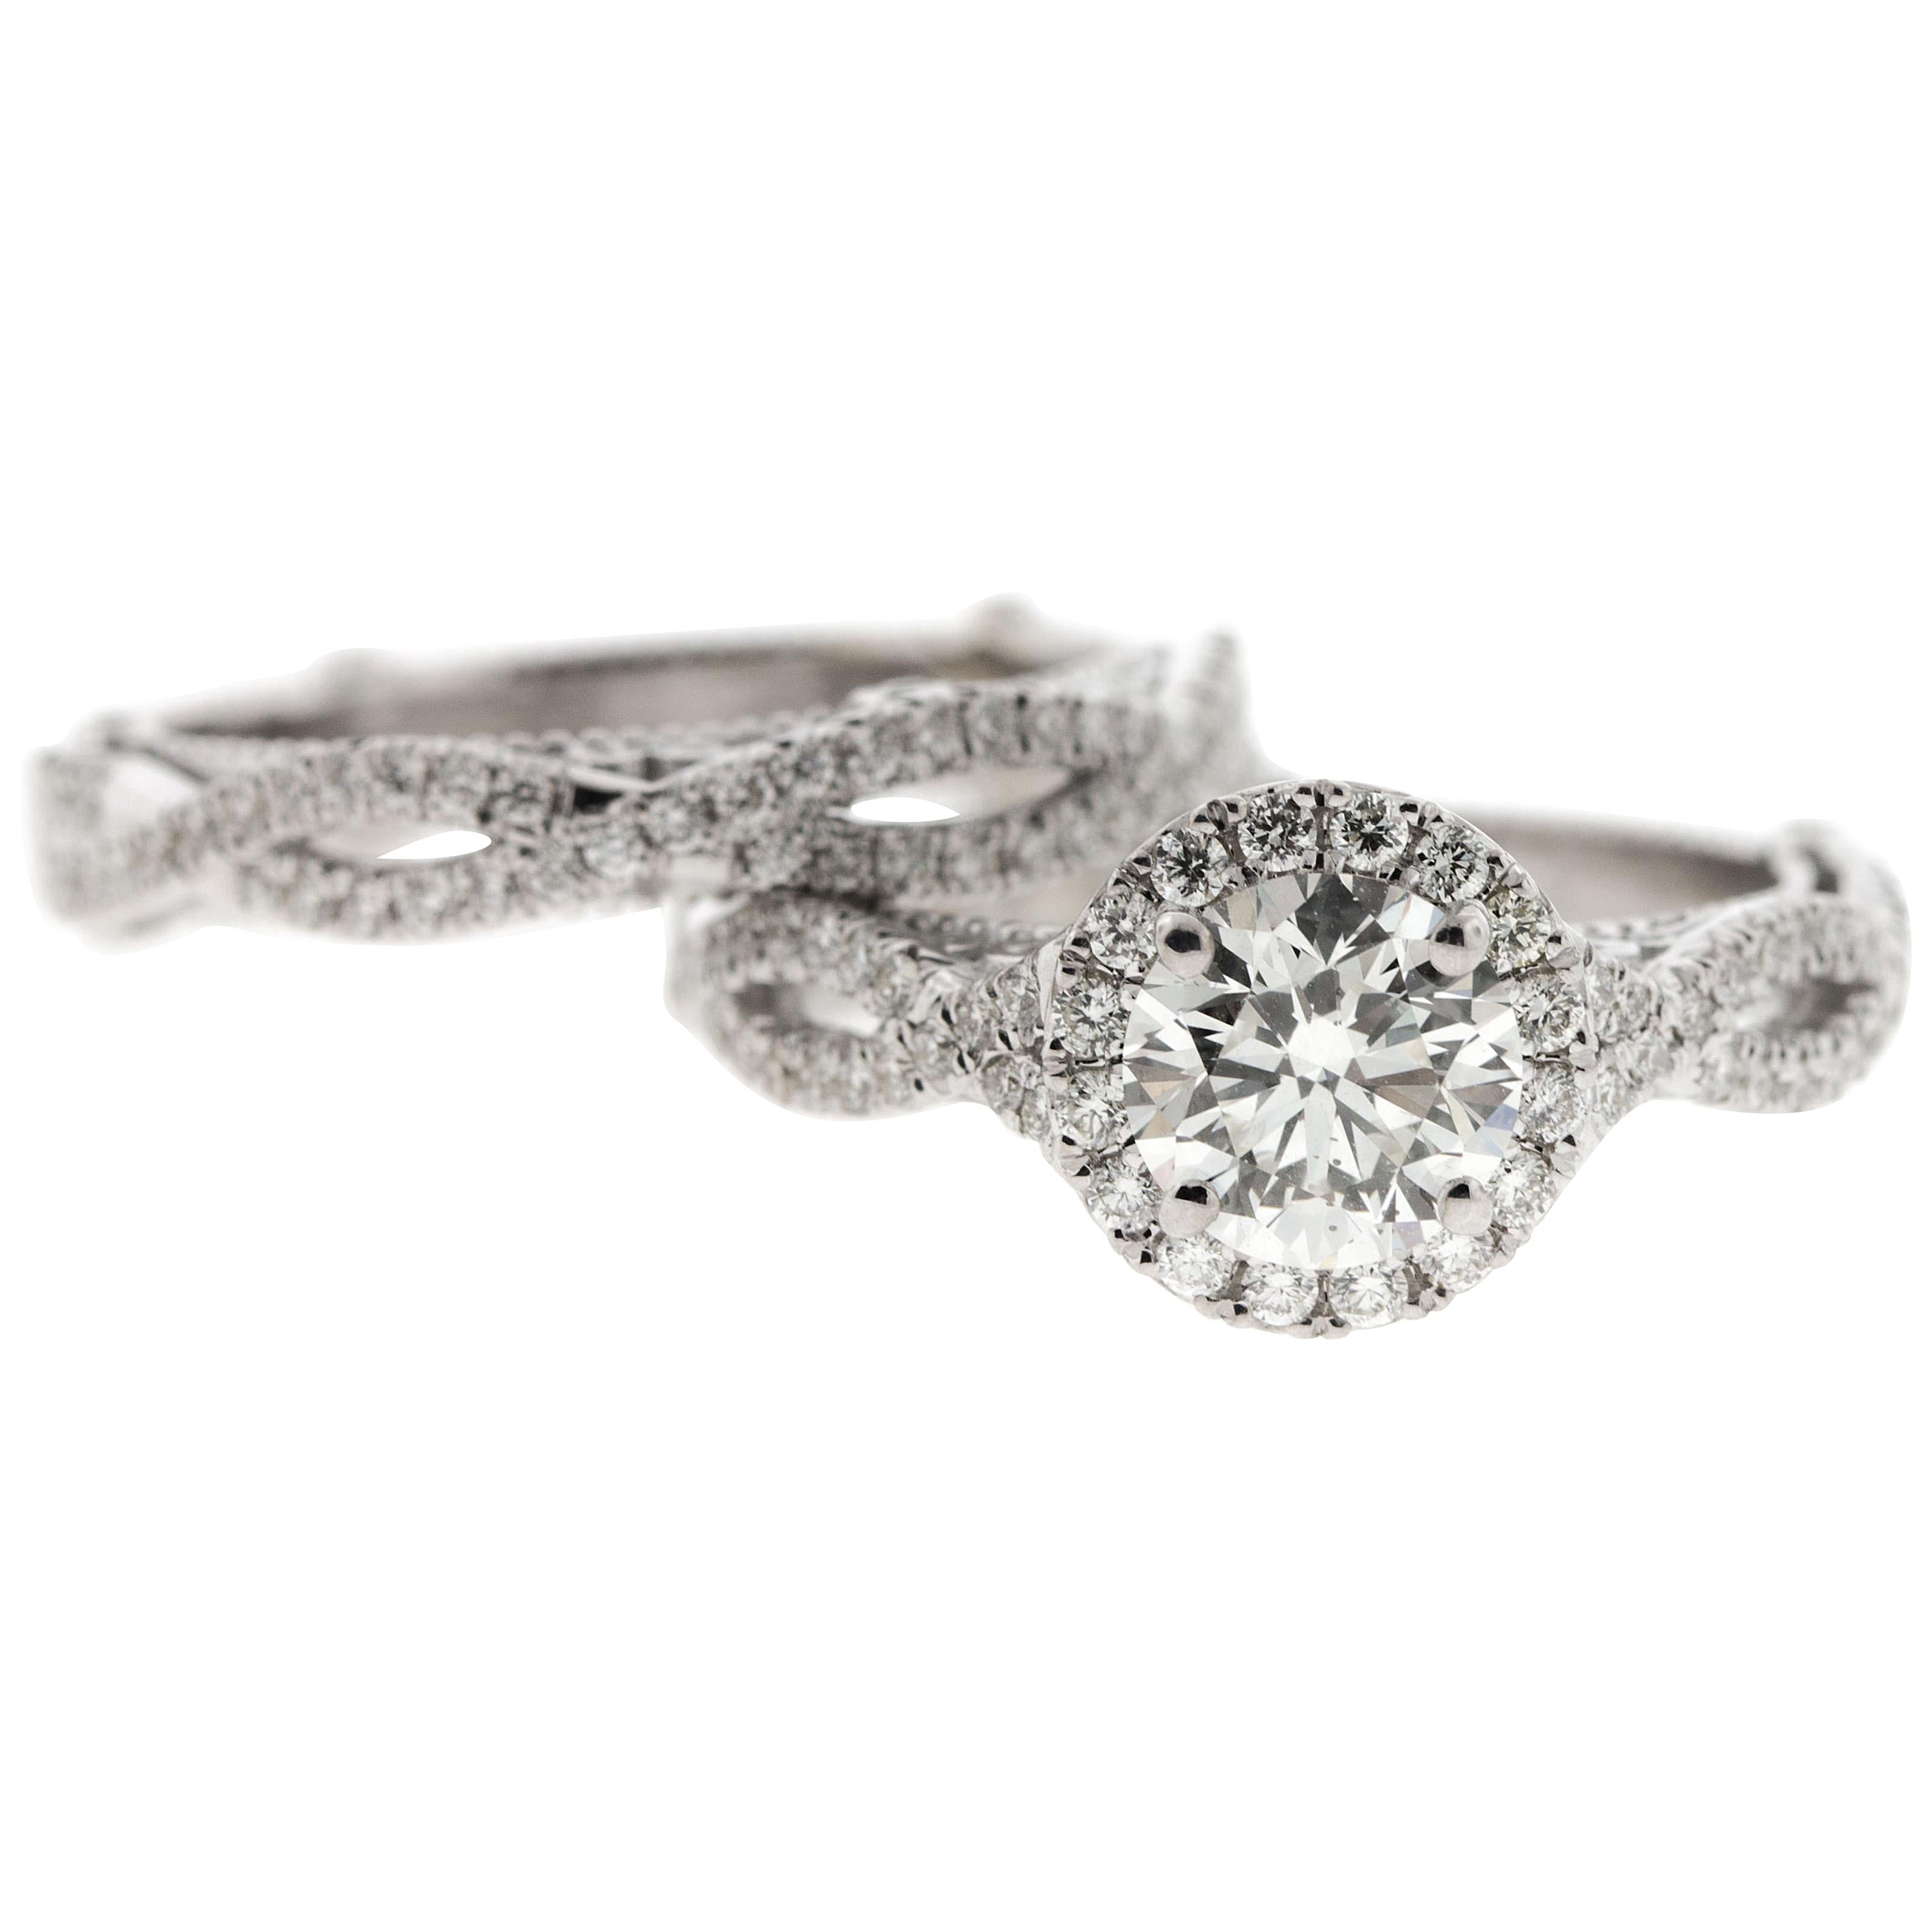 Custom Halo Diamond Engagement Ring with Cathedral Gallery & Peekaboo Diamond For Sale